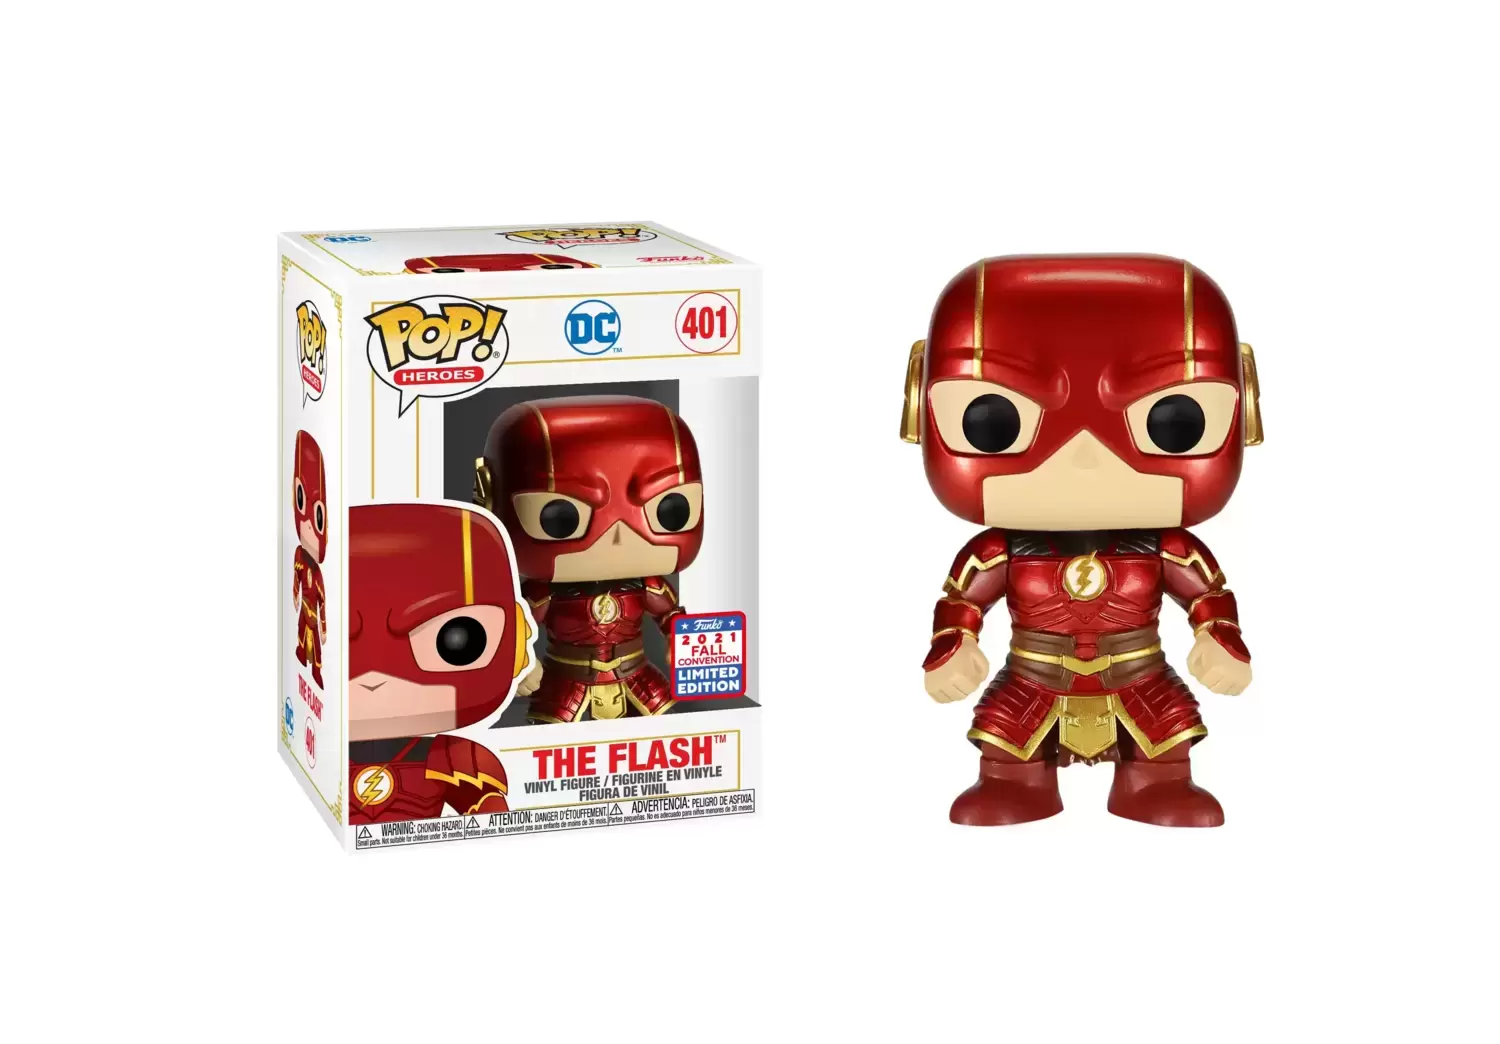 POP! Heroes - DC Comics - Imperial Palace The Flash Metallic